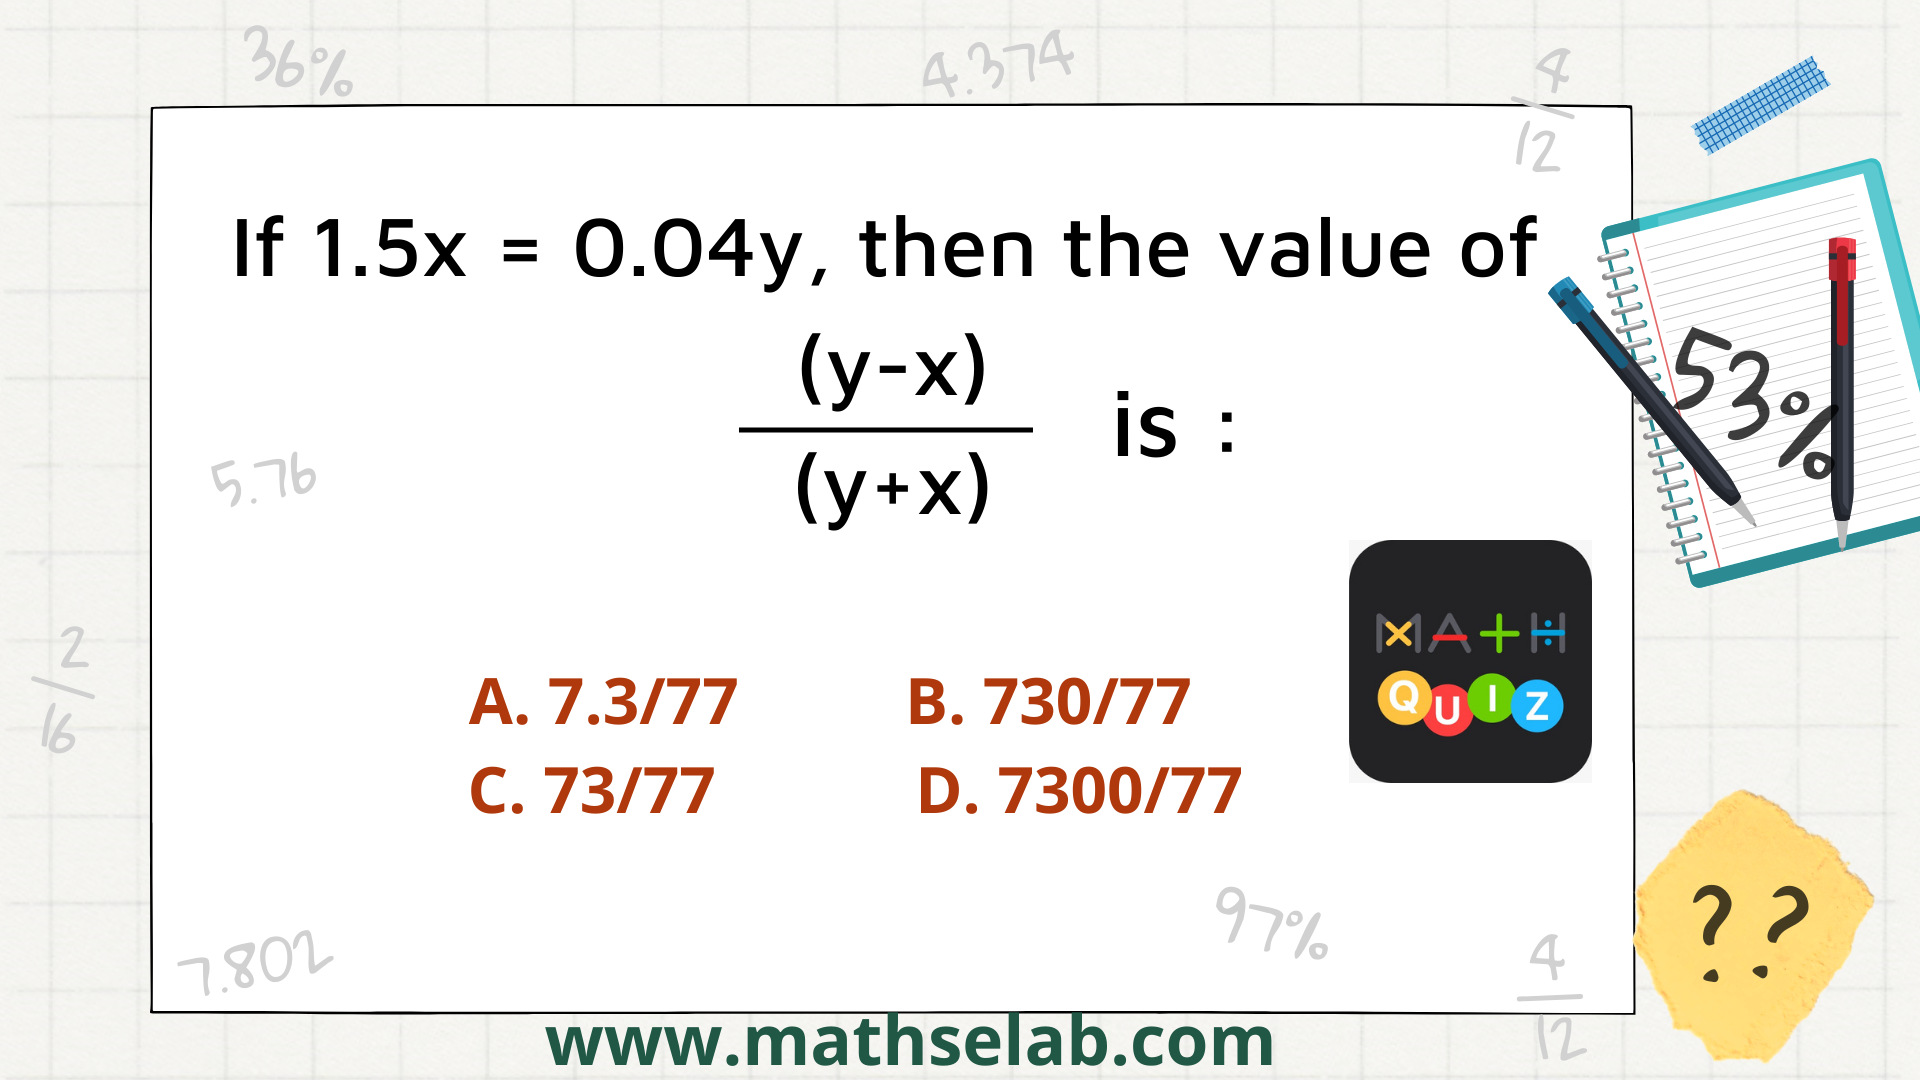 If 1.5x = 0.04y, then the value of ( (y-x) / (y+x) ) is :